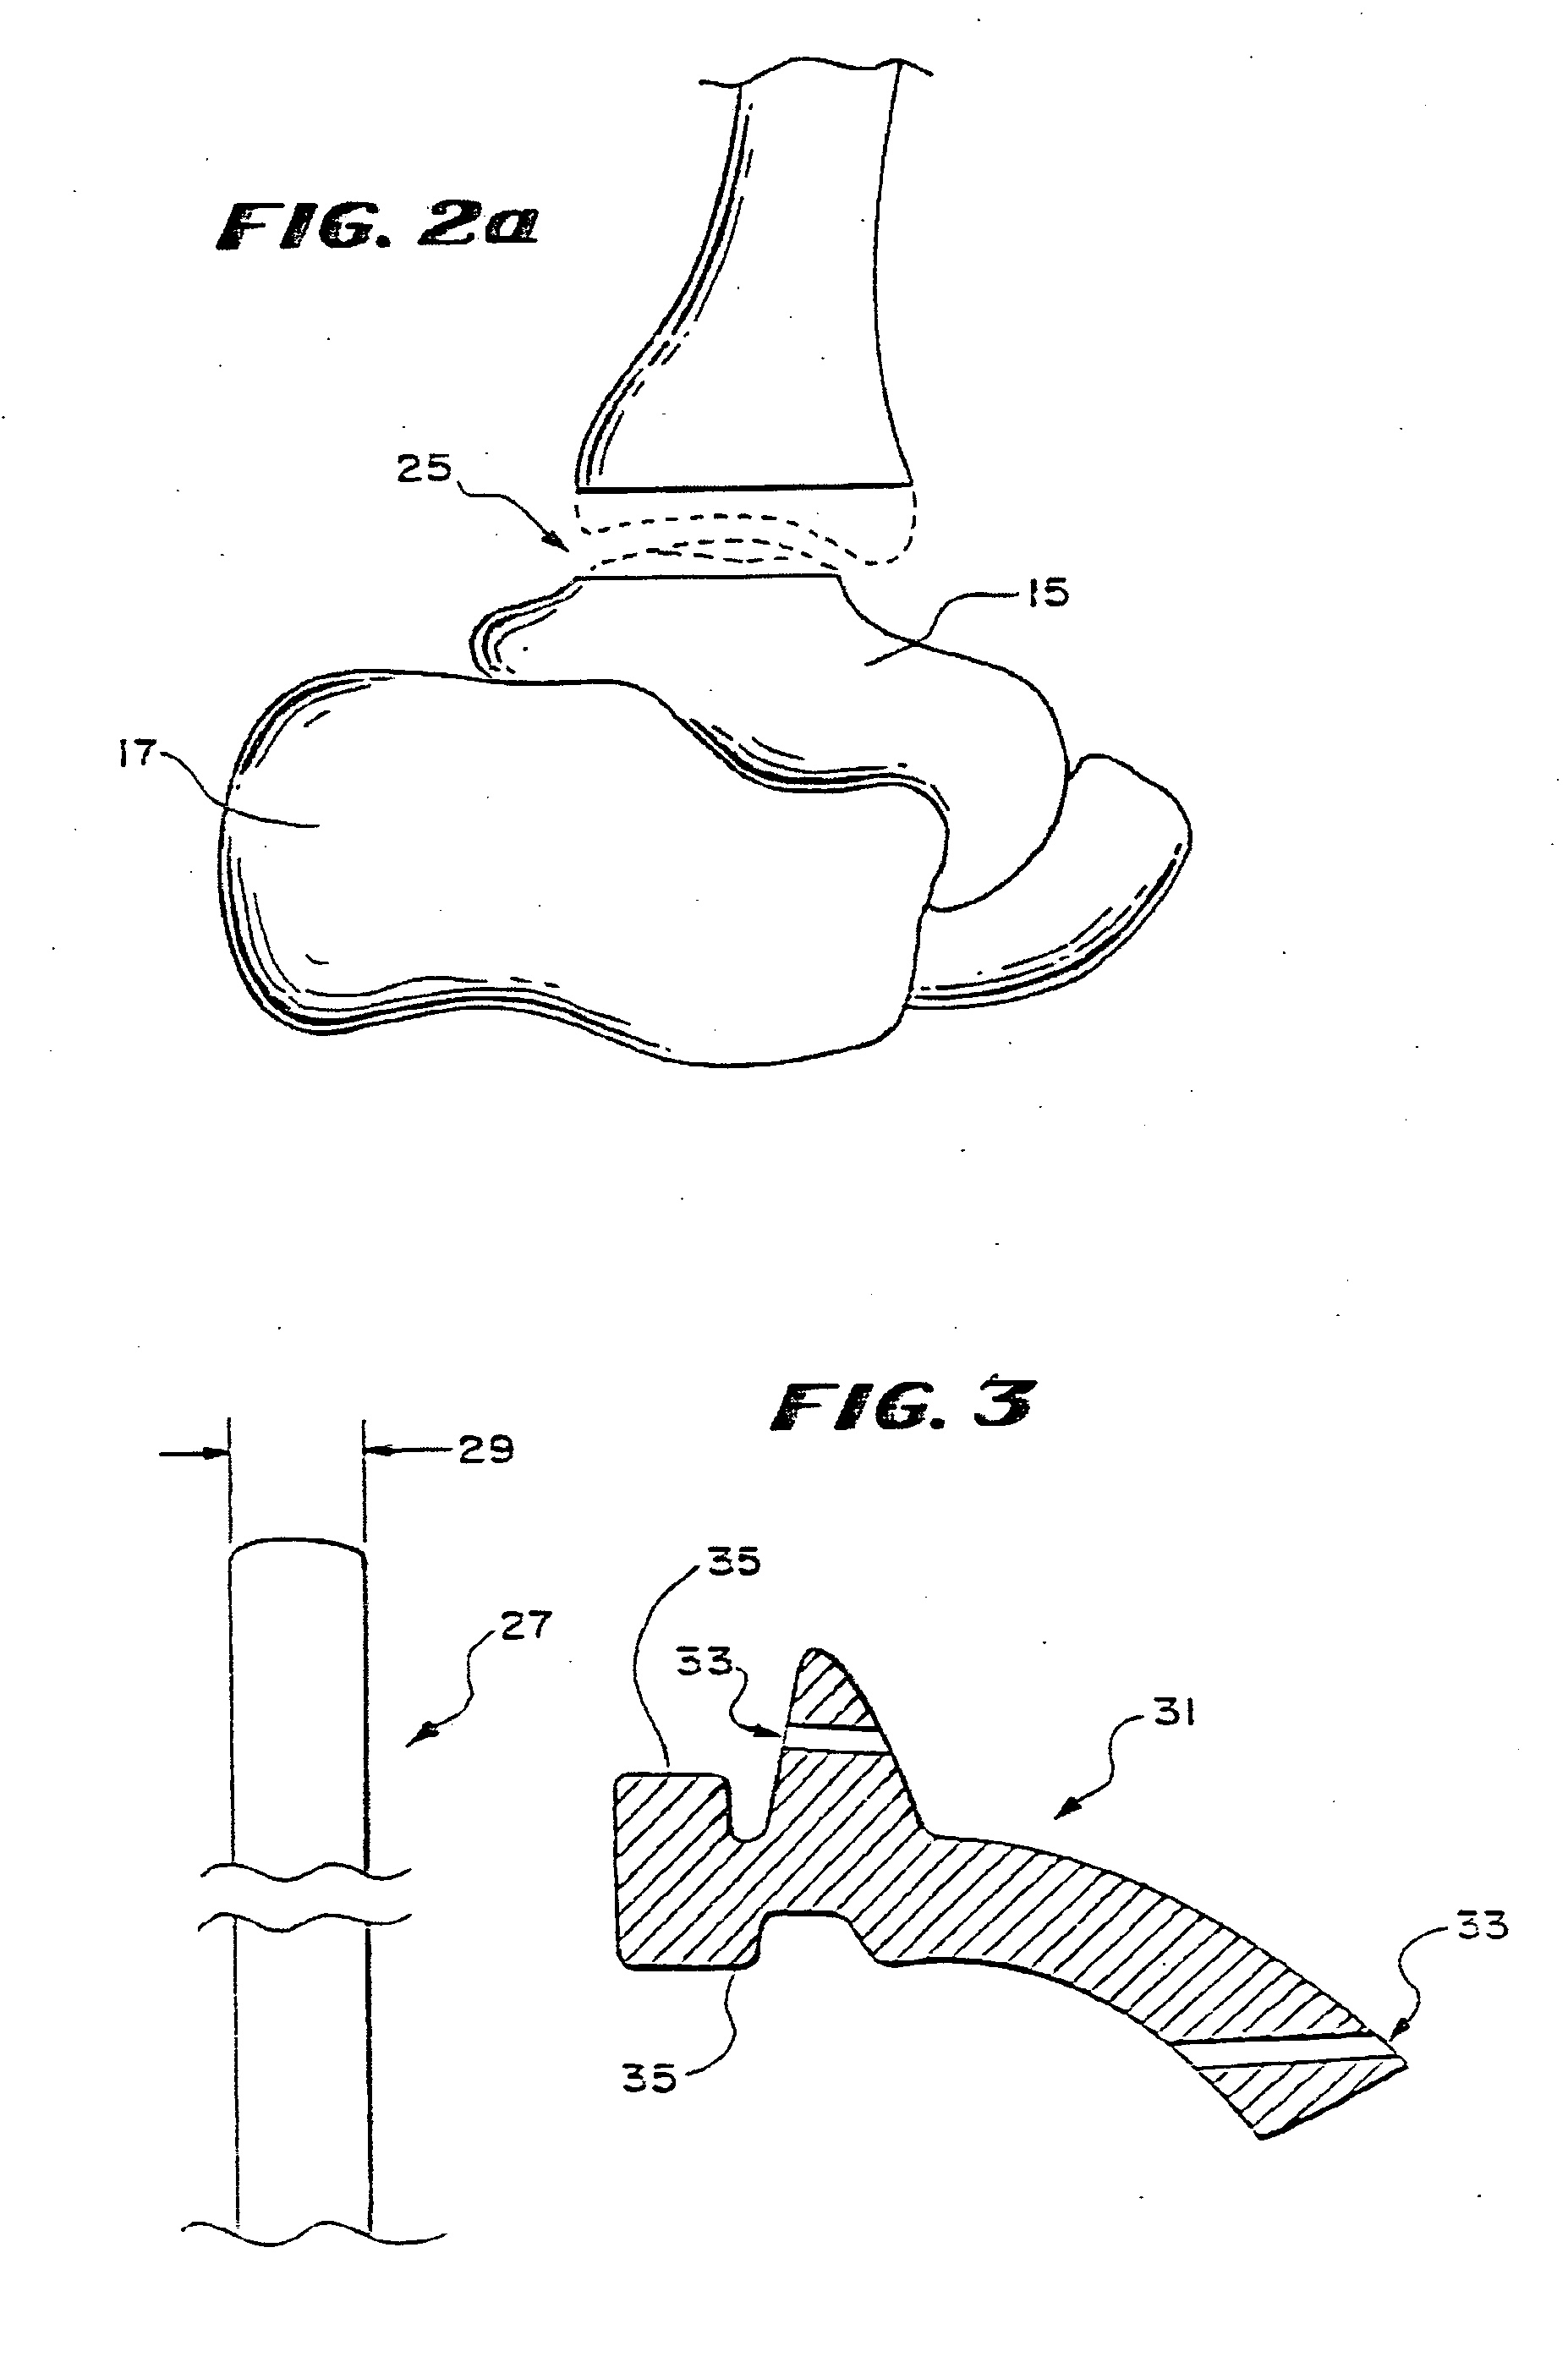 Systems and Methods for Installing Ankle Replacement Prostheses